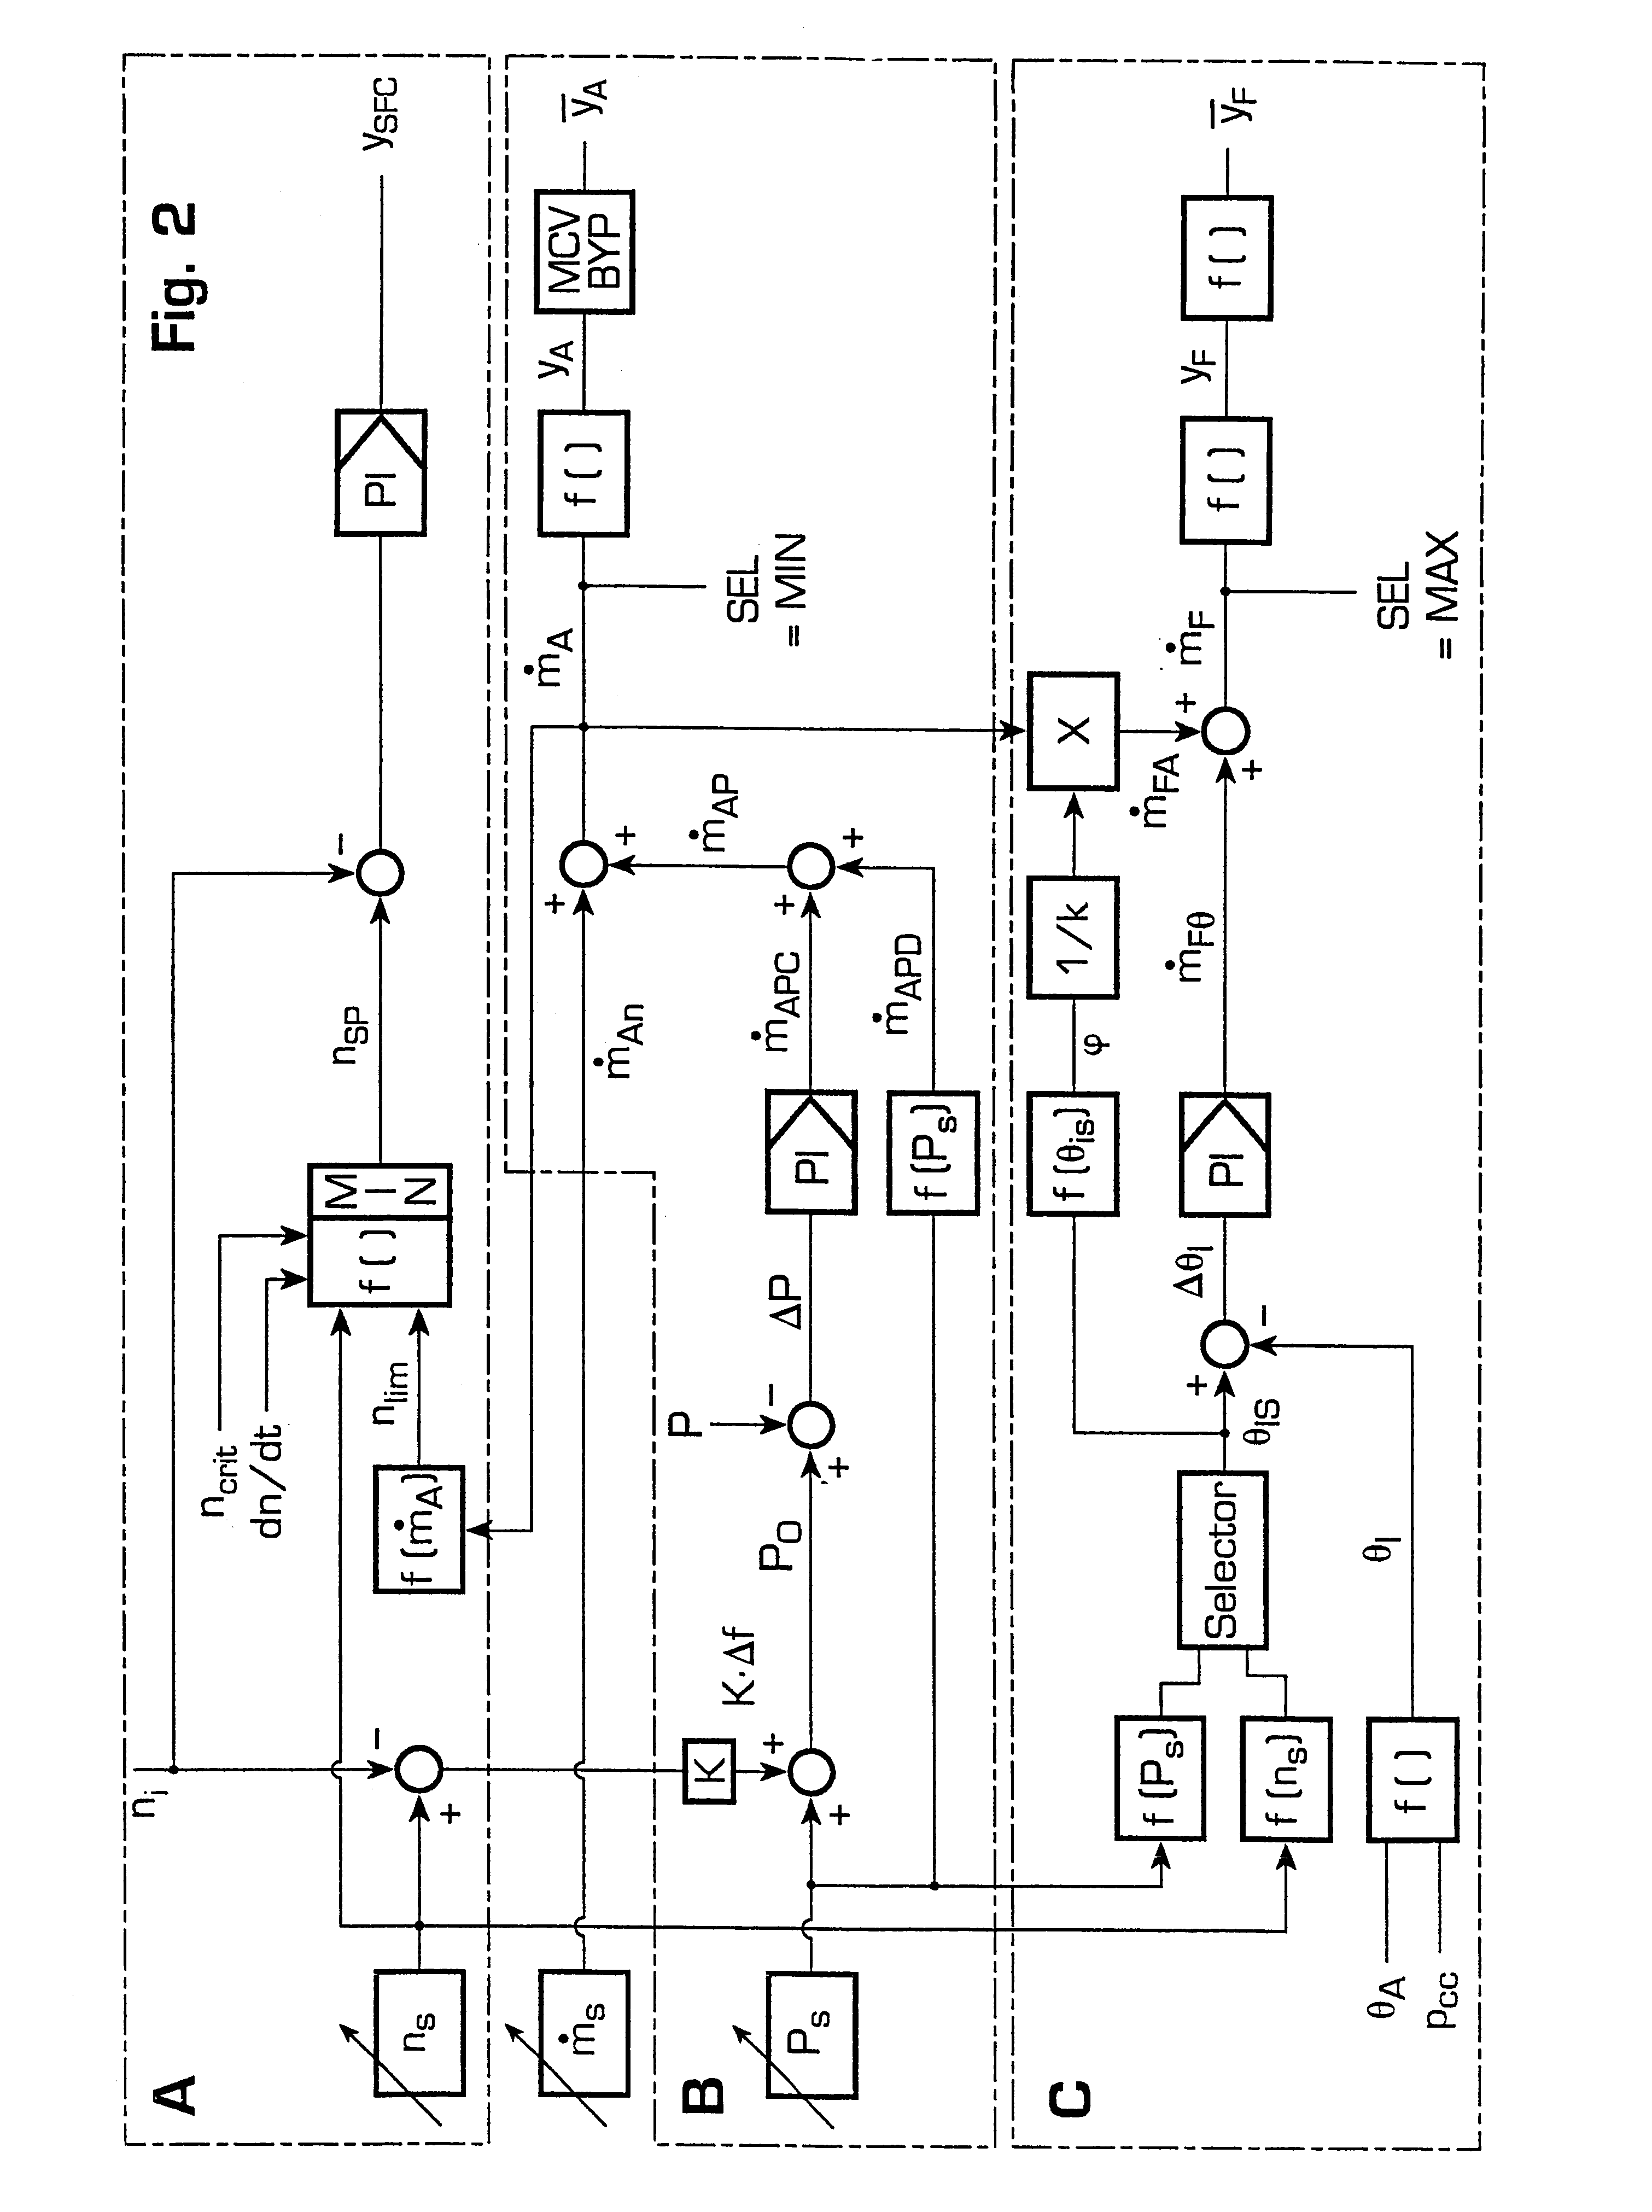 Method for operating a turbine